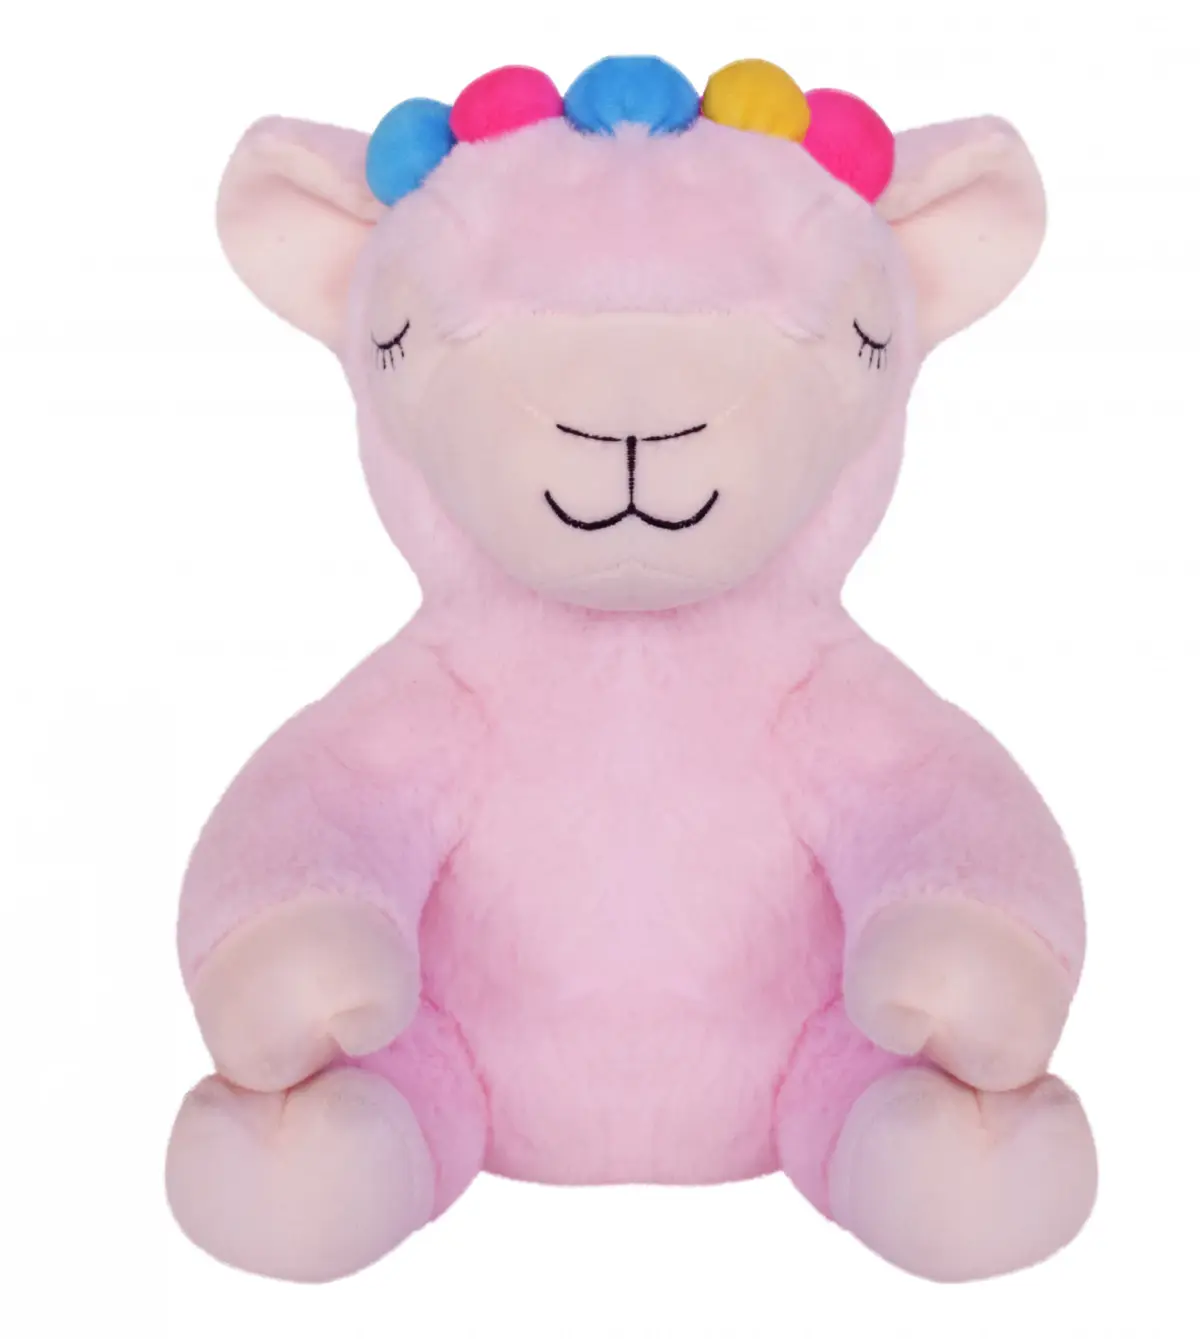 Mirada 25Cm Coin Bank Llama Soft Toy Pink, Soft Toys For Kids, 3Y+